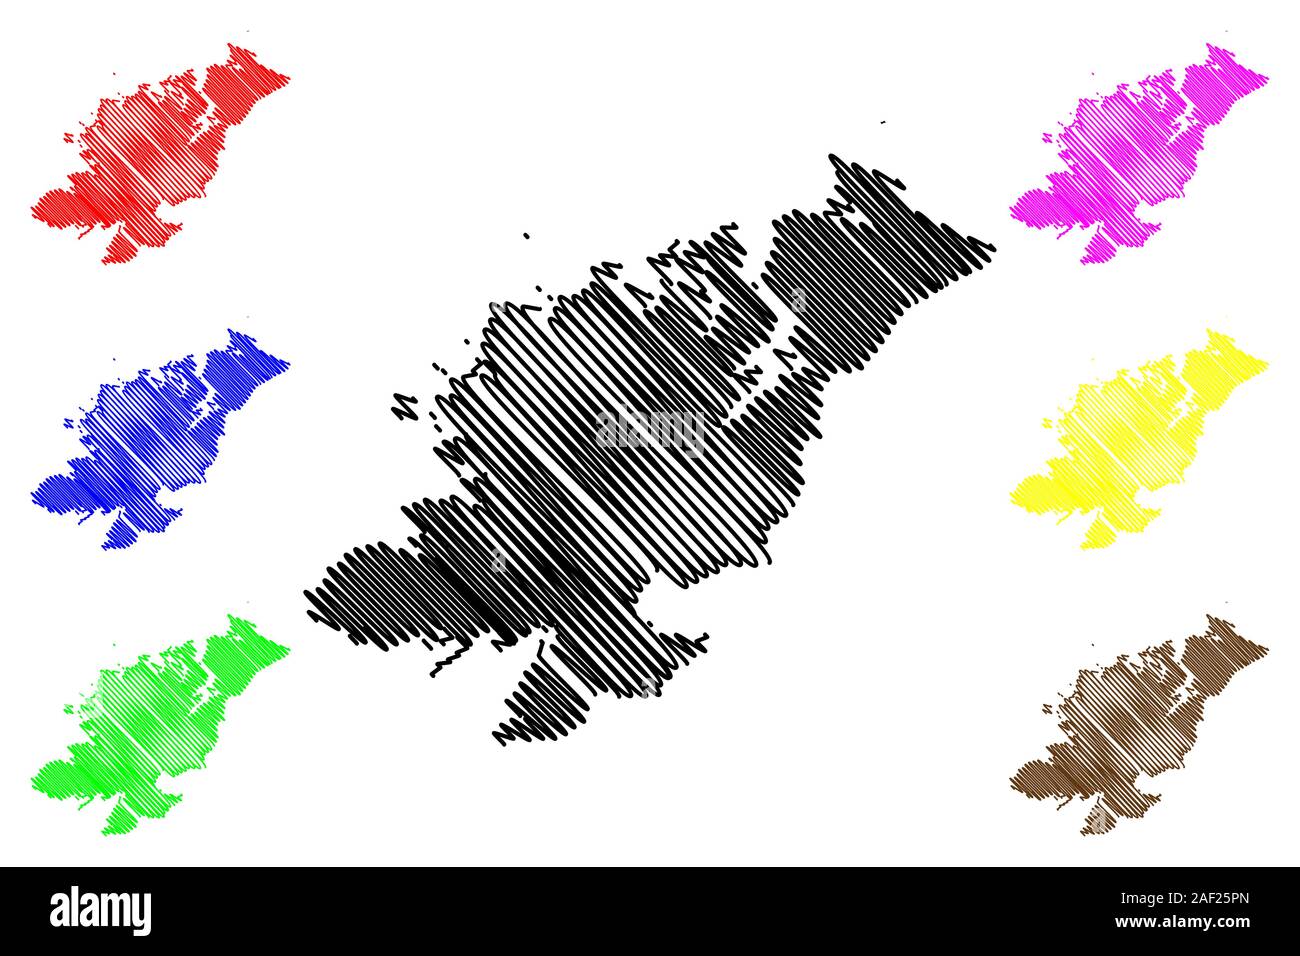 Donegal County Council (Republic of Ireland, Counties of Ireland) map vector illustration, scribble sketch Donegal map Stock Vector